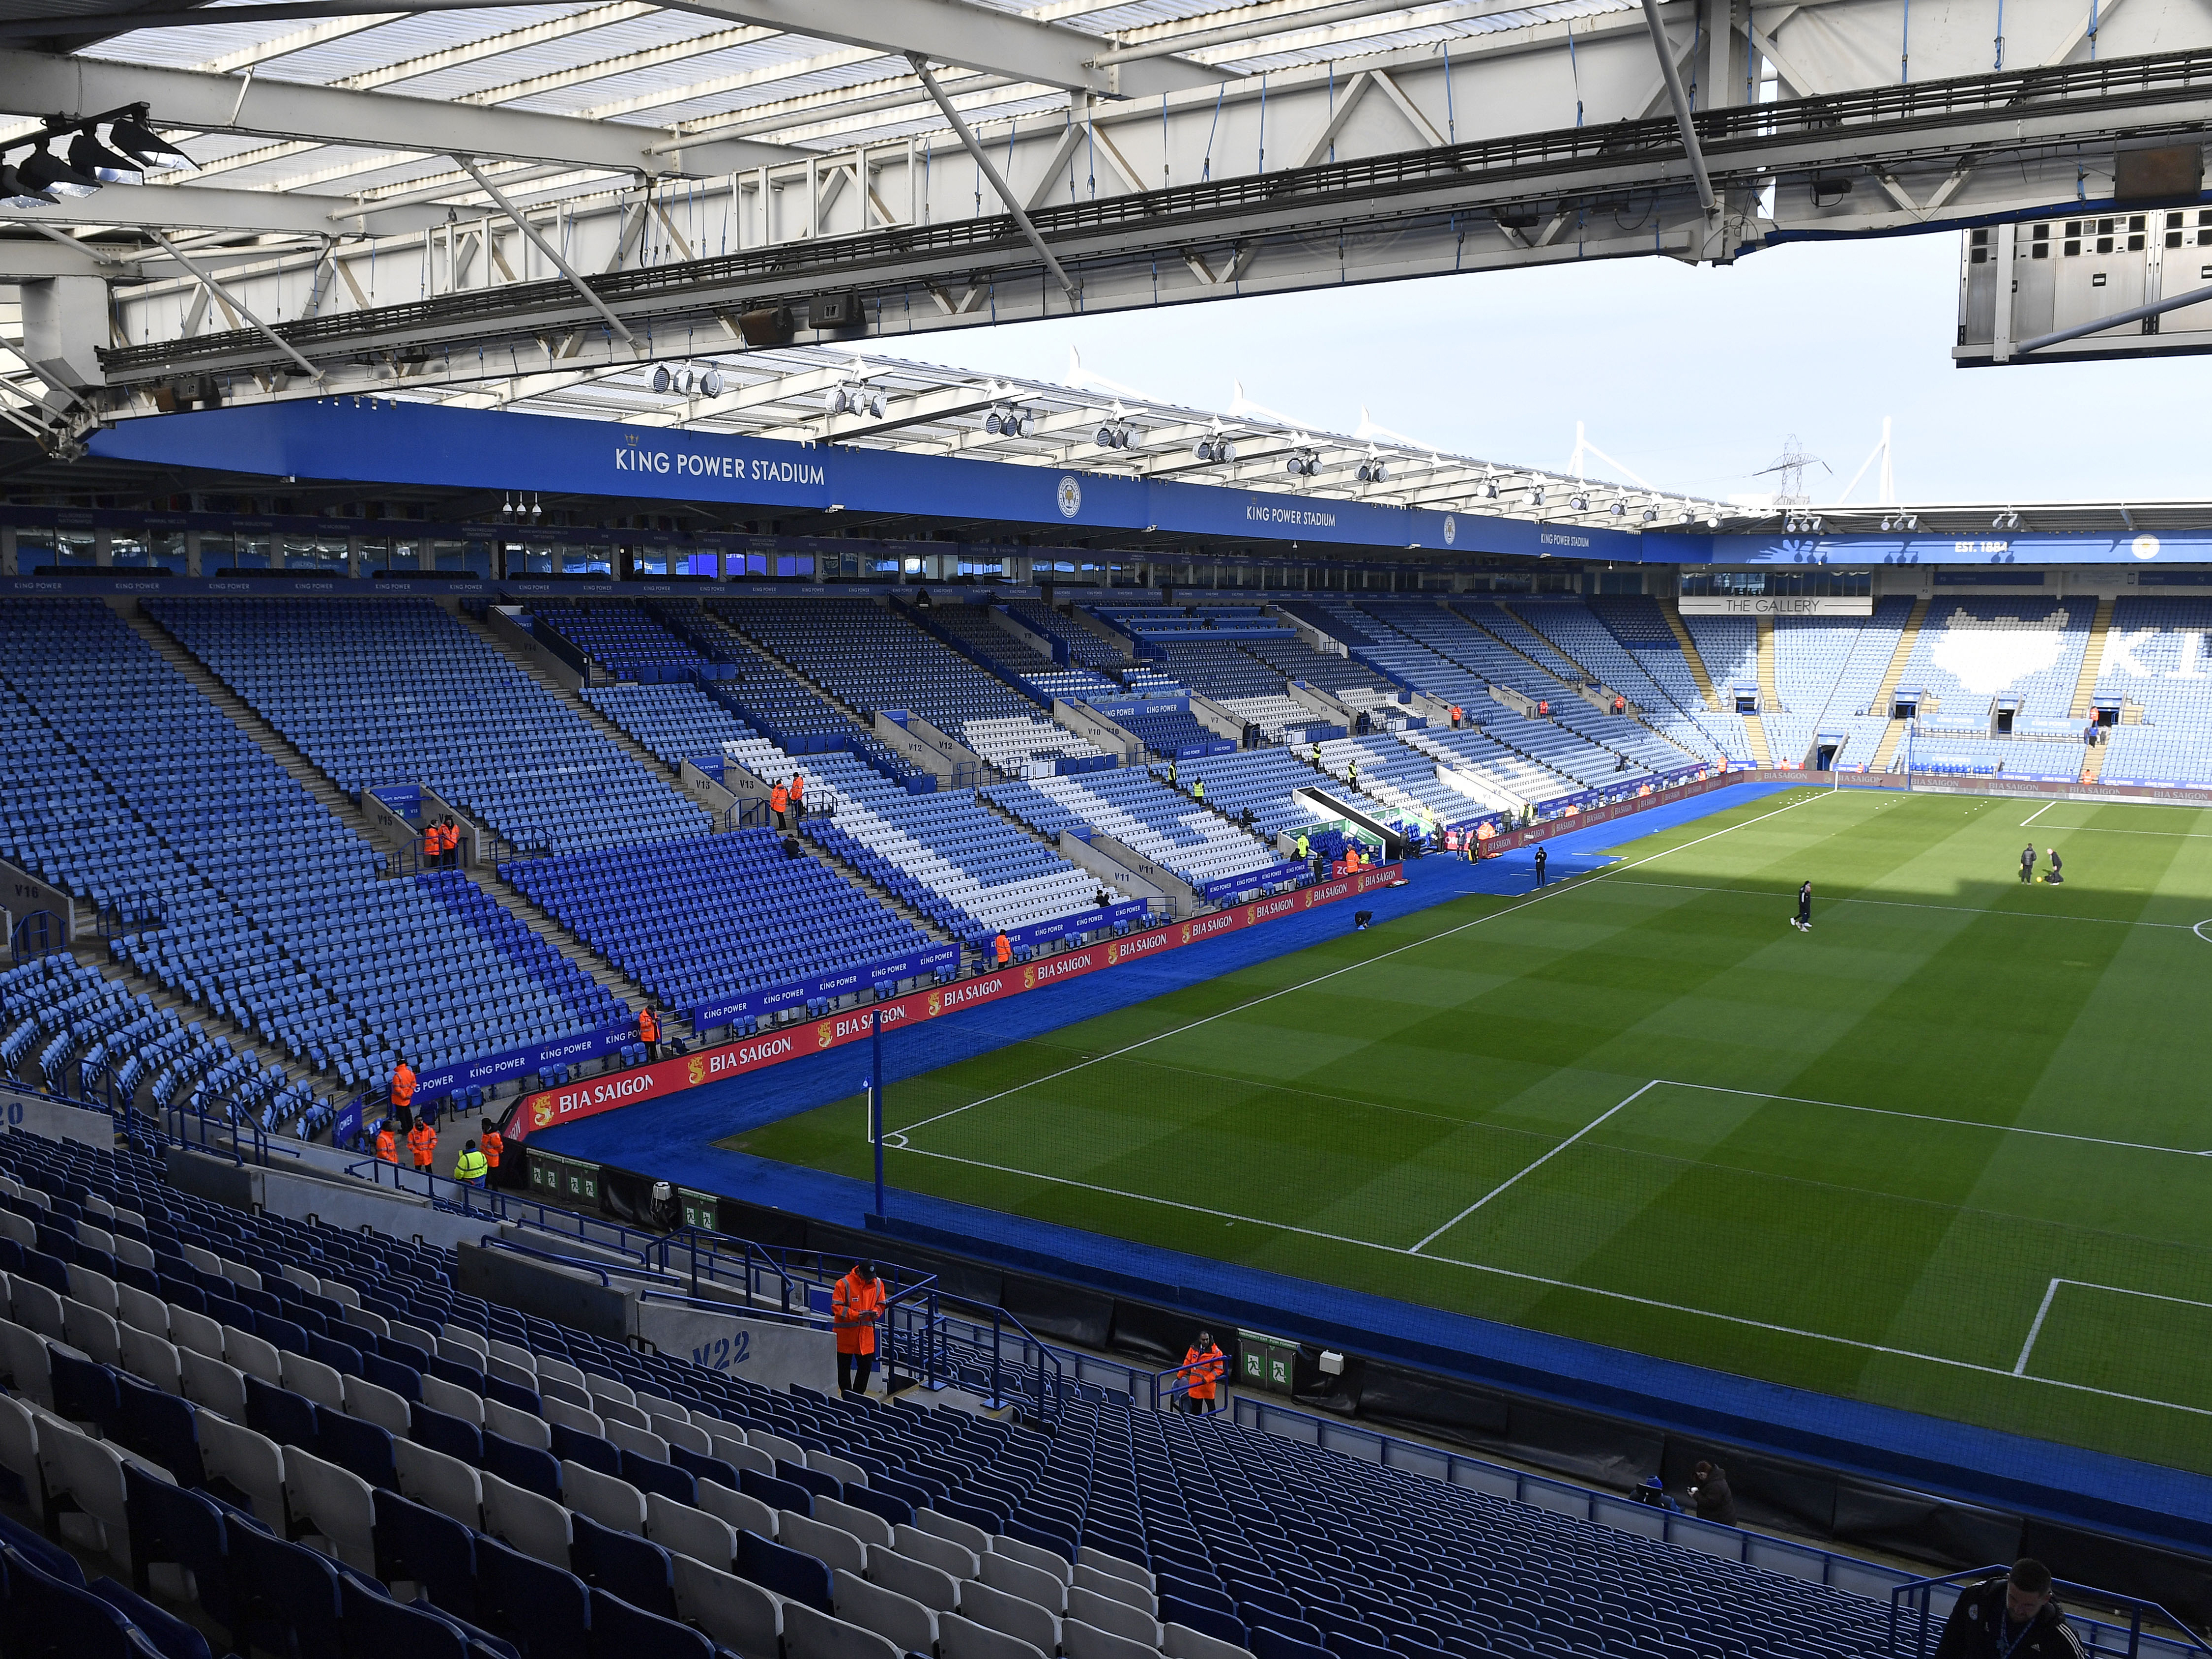 A general view of King Power Stadium home of Leicester City